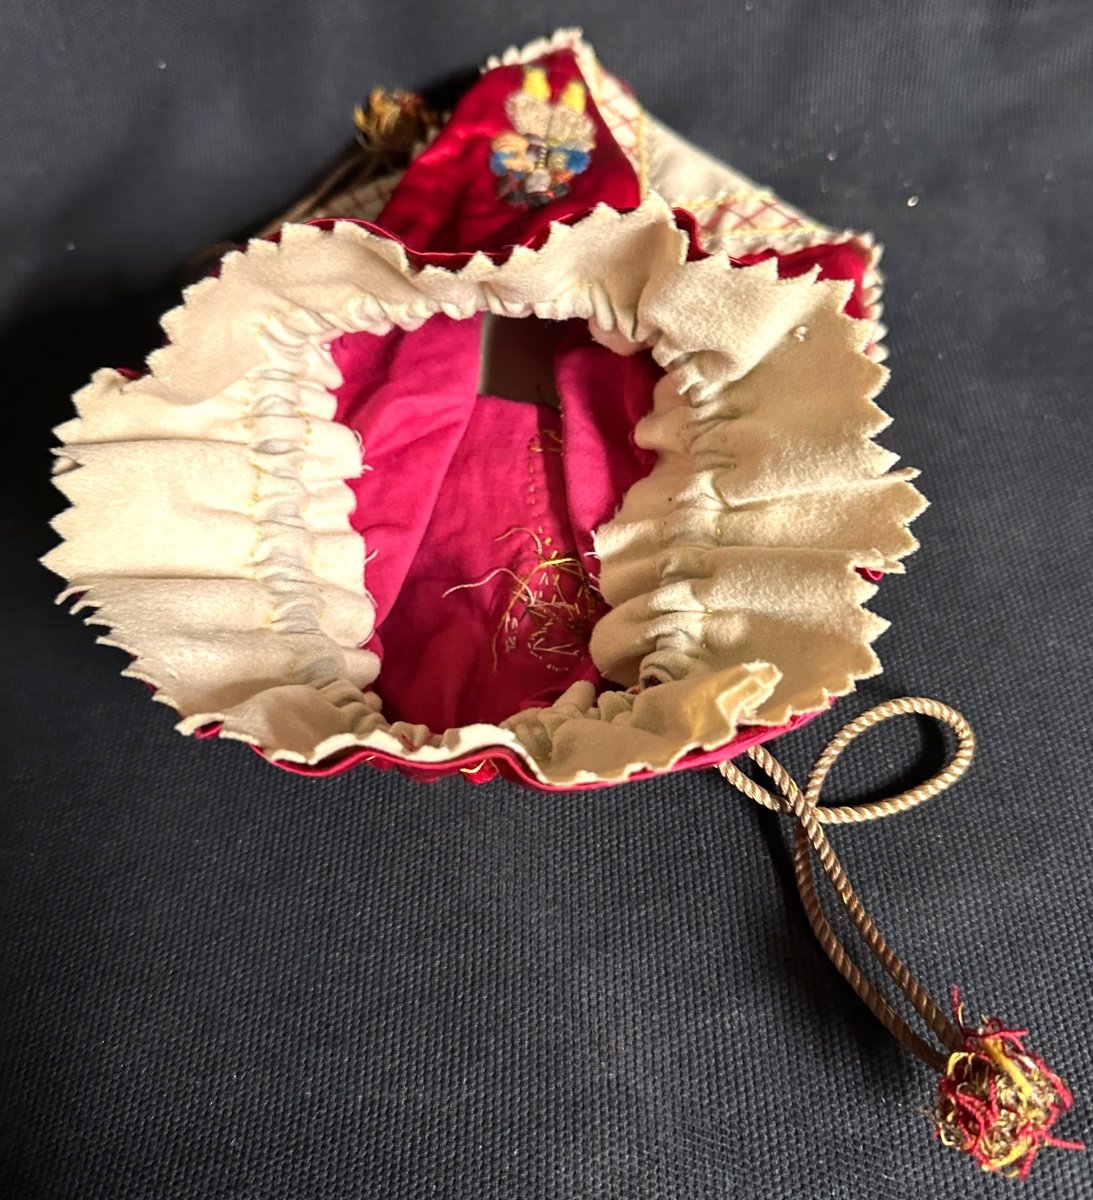 Brittany St Malo Minaudiere Or Reticule Late 19th Century Lady's Bag In Embroidered Silk Purse-photo-2